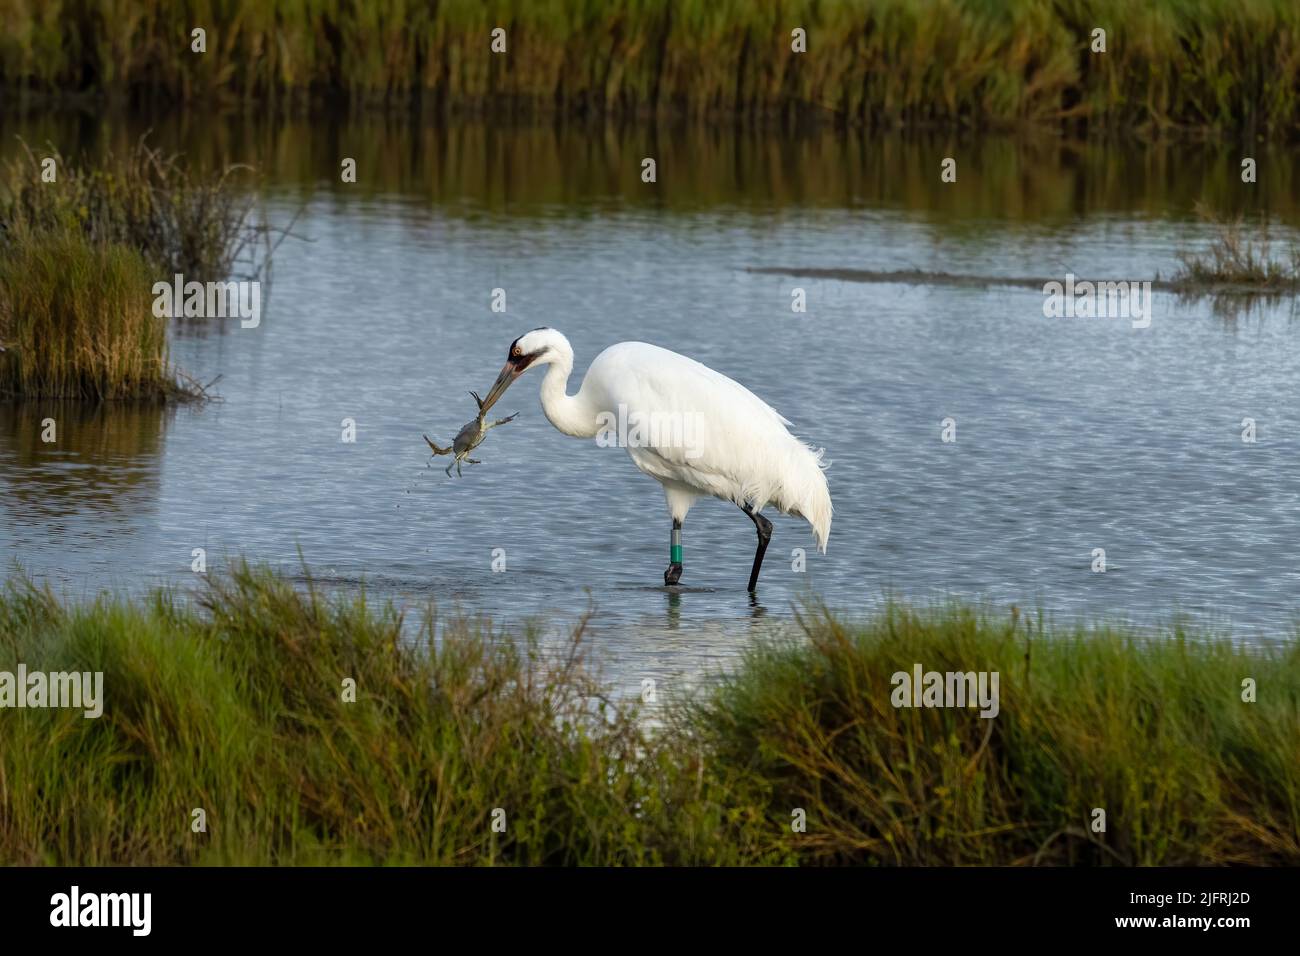 A Whooping Crane, Grus americana, catching an Atlantic Blue Crab in the Aransas National Wildlife Refuge in Texas. Stock Photo